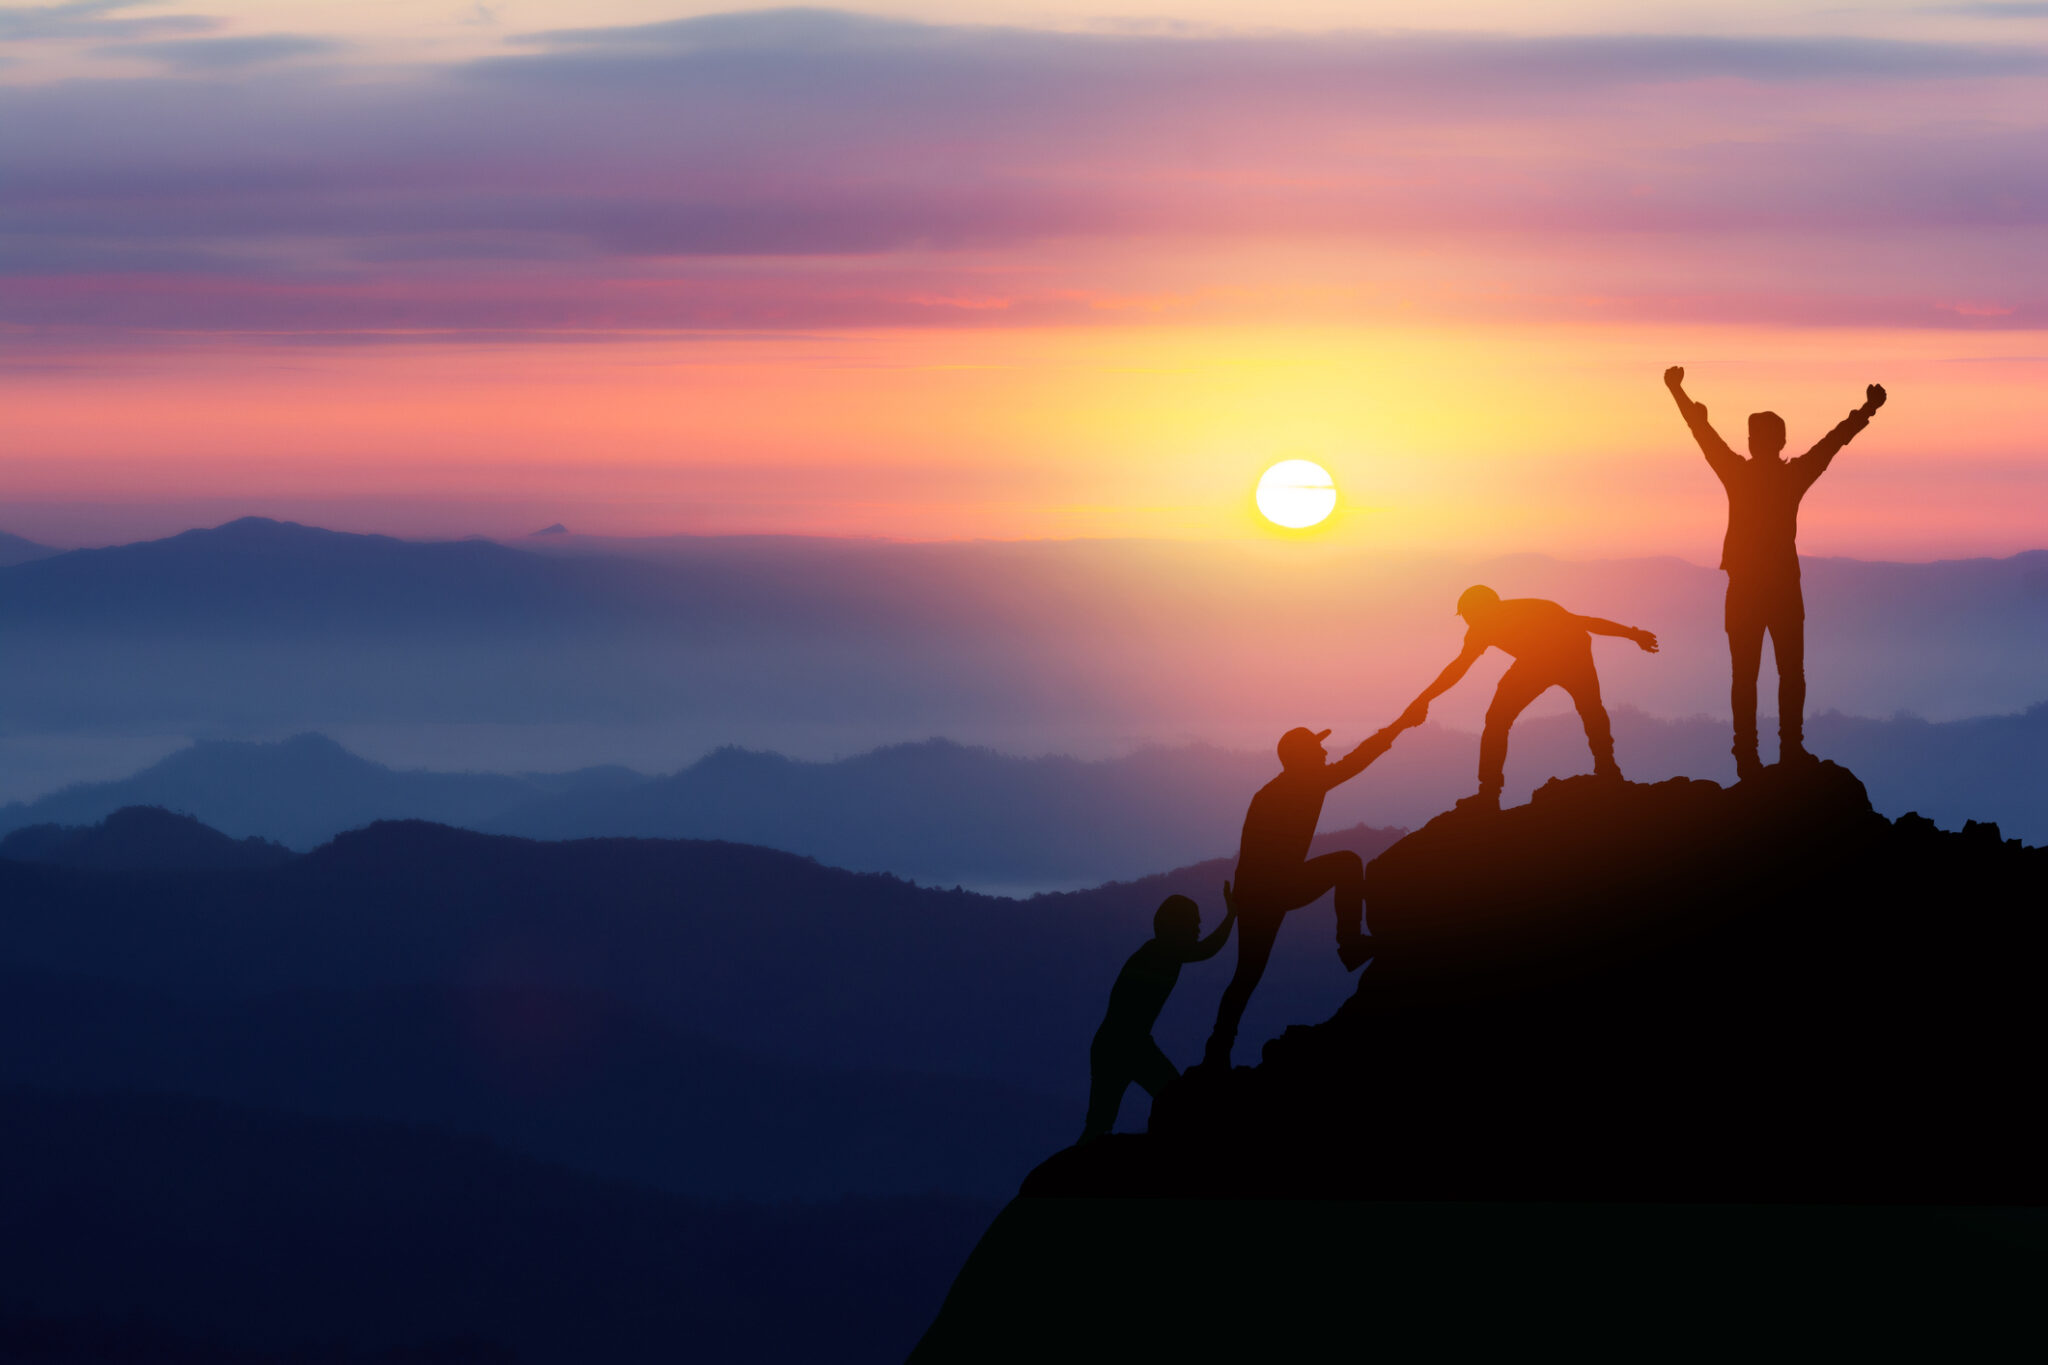 Teamwork friendship hiking help each other trust assistance silhouette in mountains, sunrise. Teamwork of two men hiker helping each other on top of mountain climbing team beautiful sunrise landscape